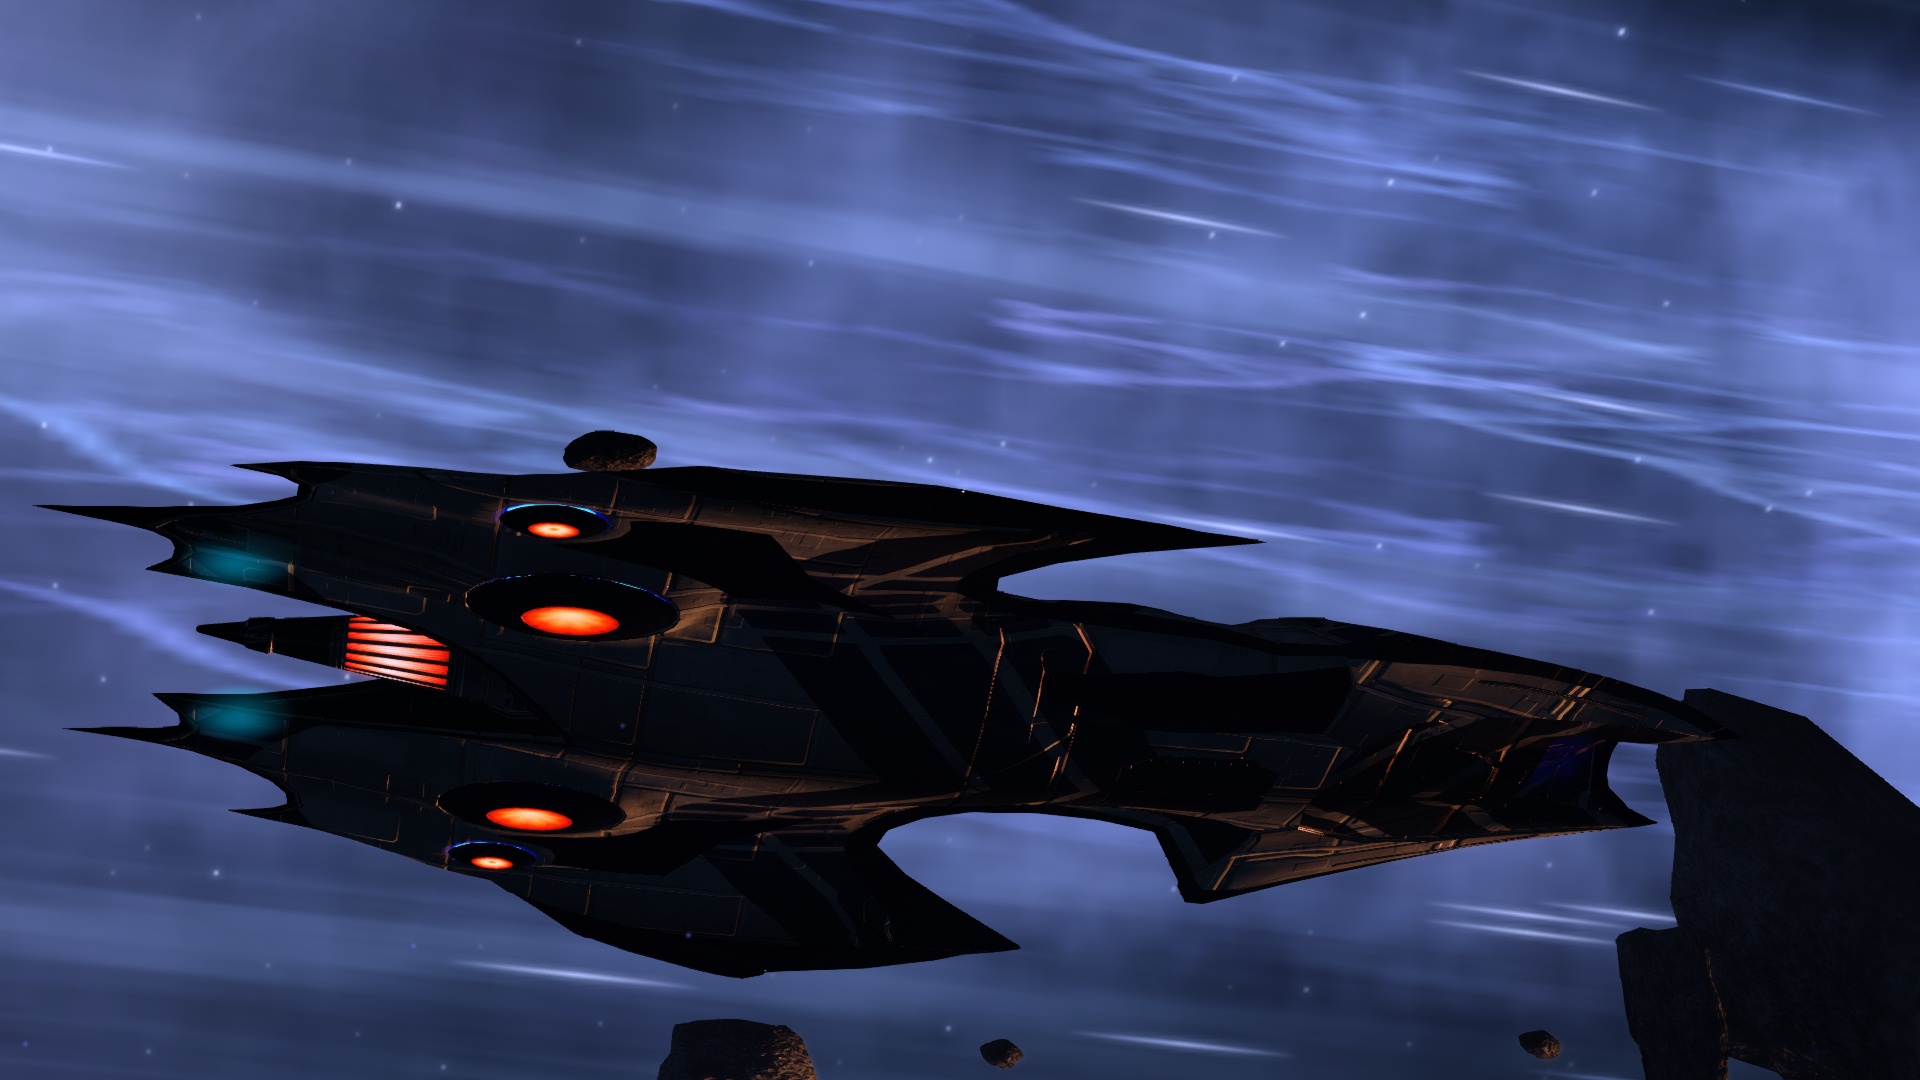 U.S.S. Purgetory in VZA 1004 'Out in the Cold' by jdciollins 12th Legacy Fleet